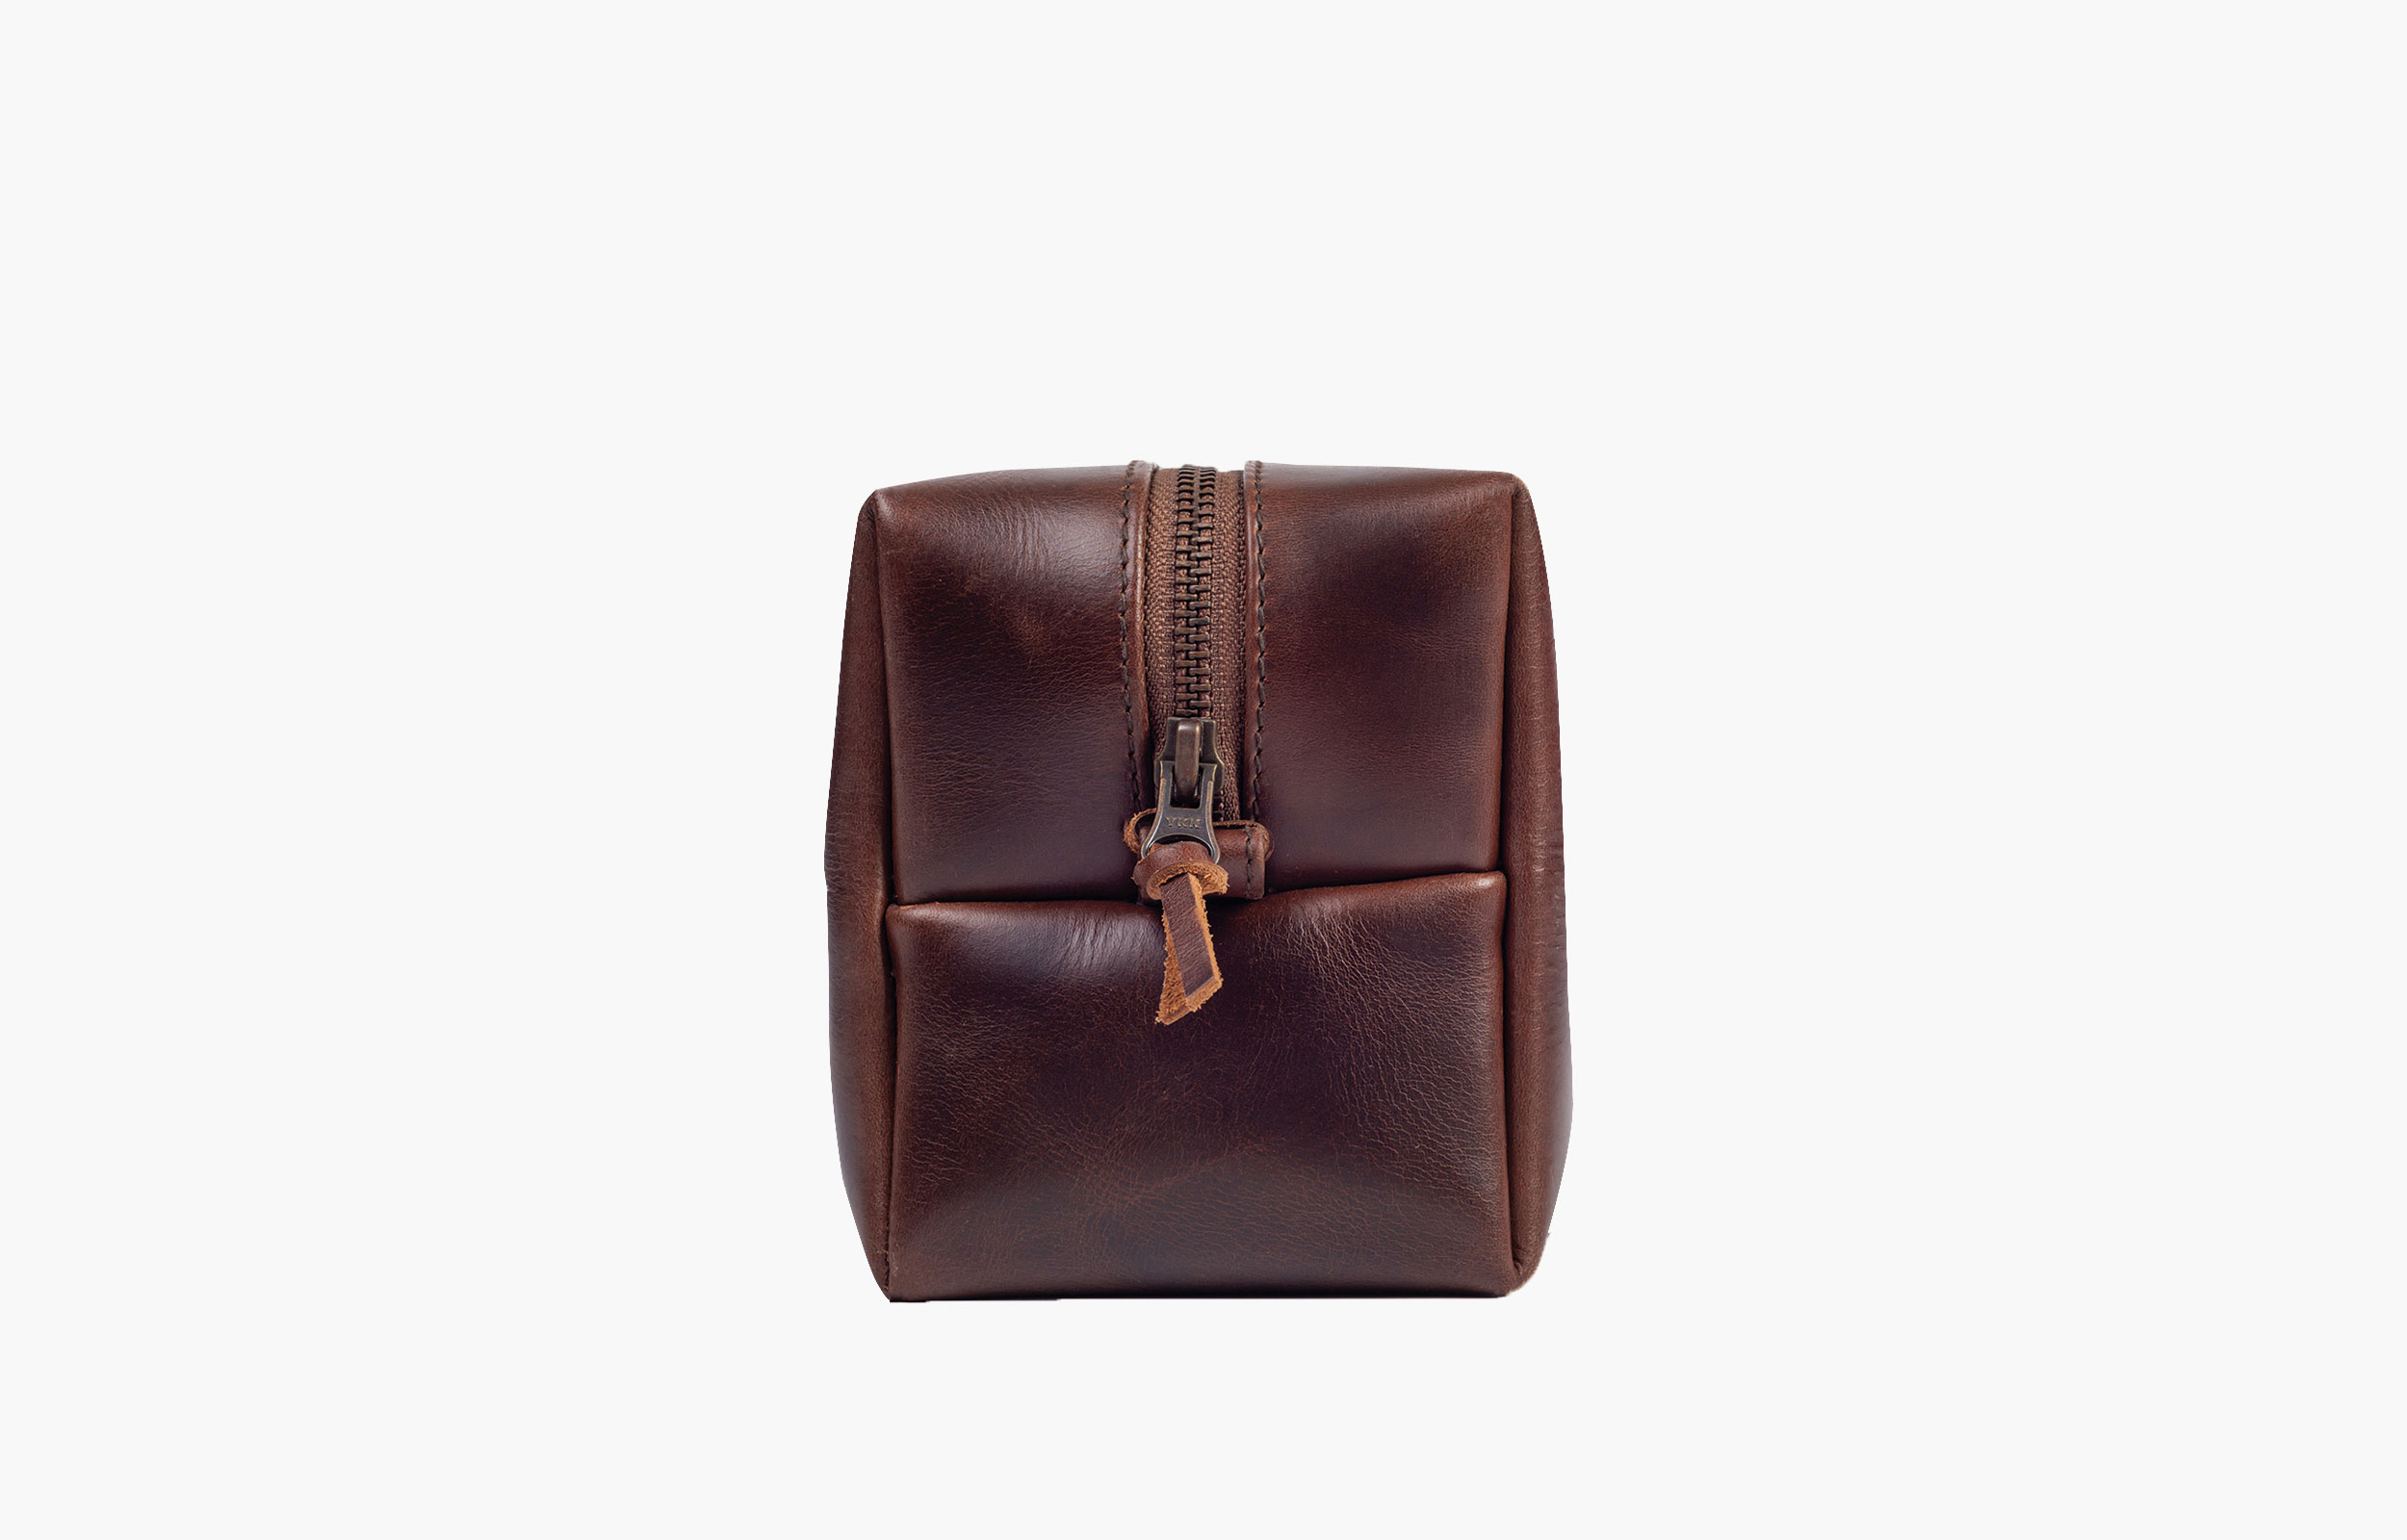 Walter Crazy Brown Leather Bag 2